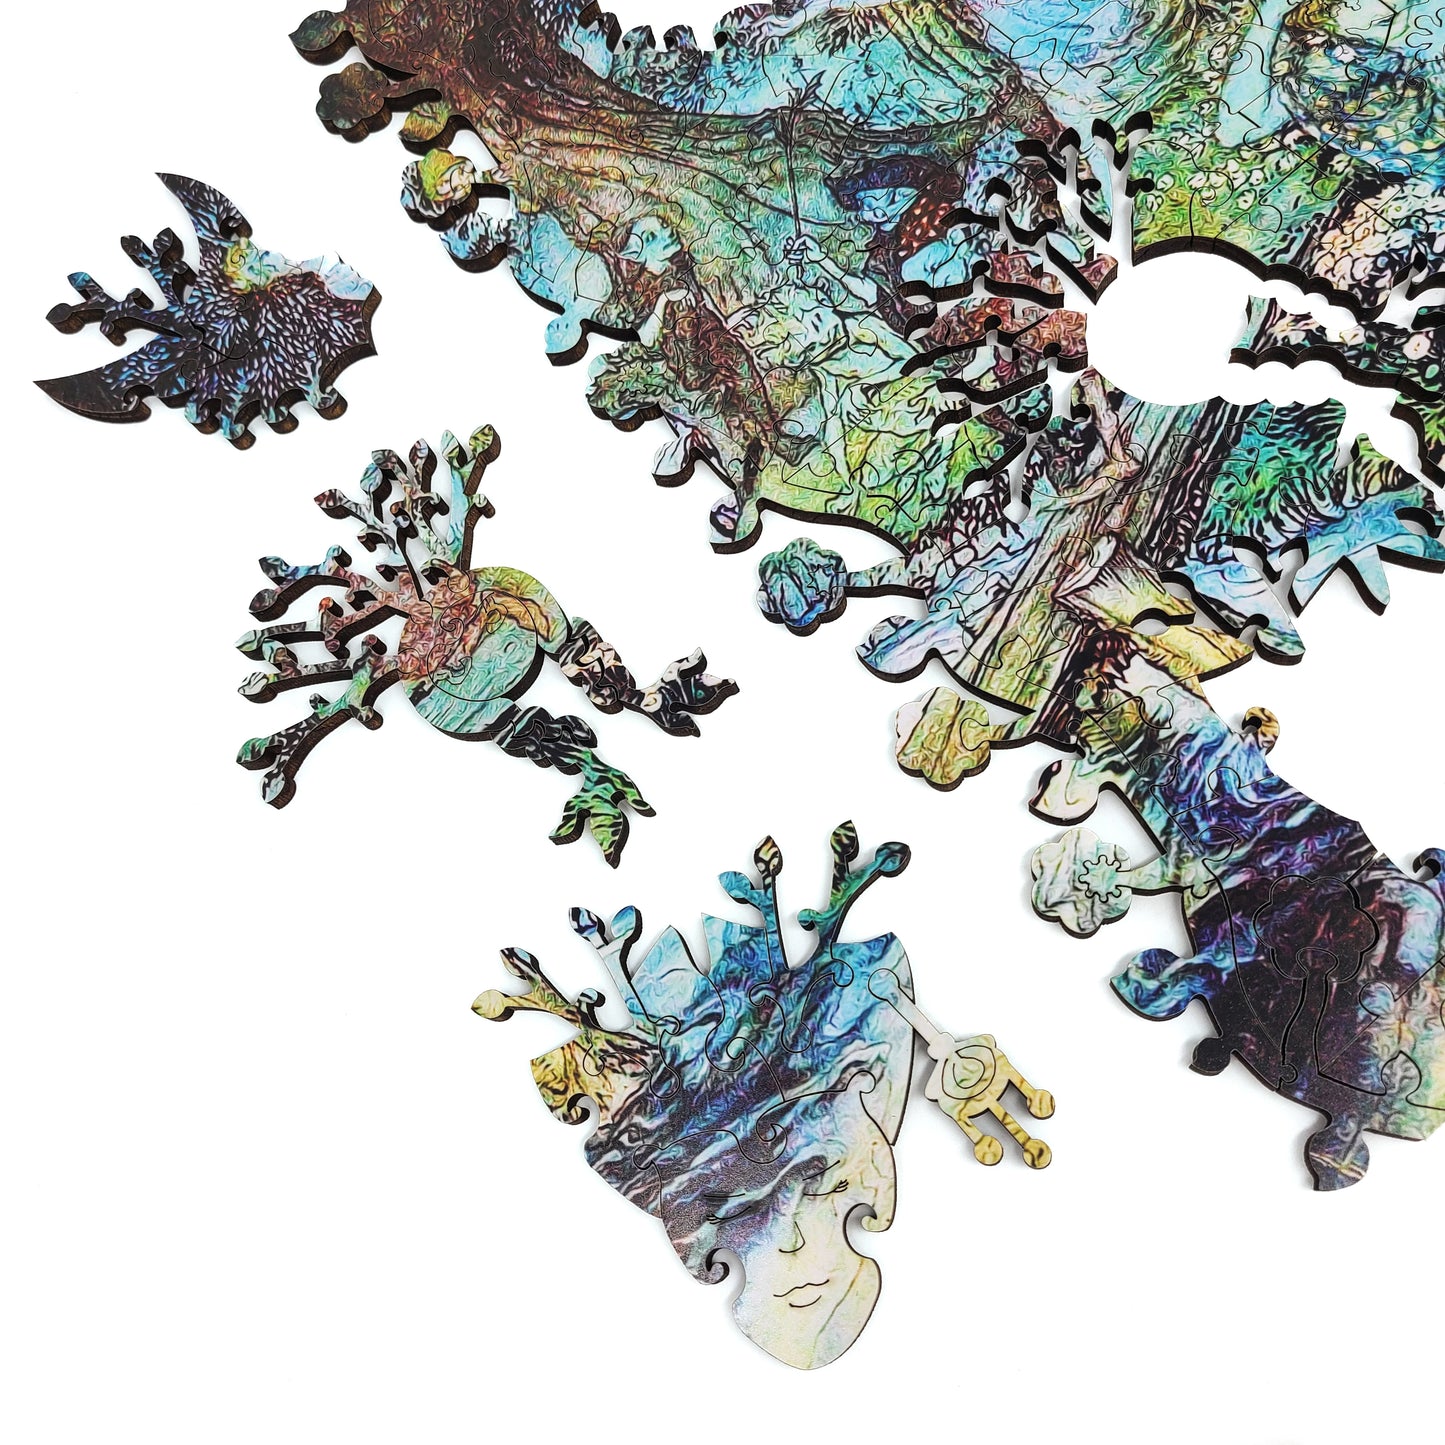 Wooden Jigsaw Puzzle with Uniquely Shaped Pieces for Adults - 230 Pieces - Forest Nymphs